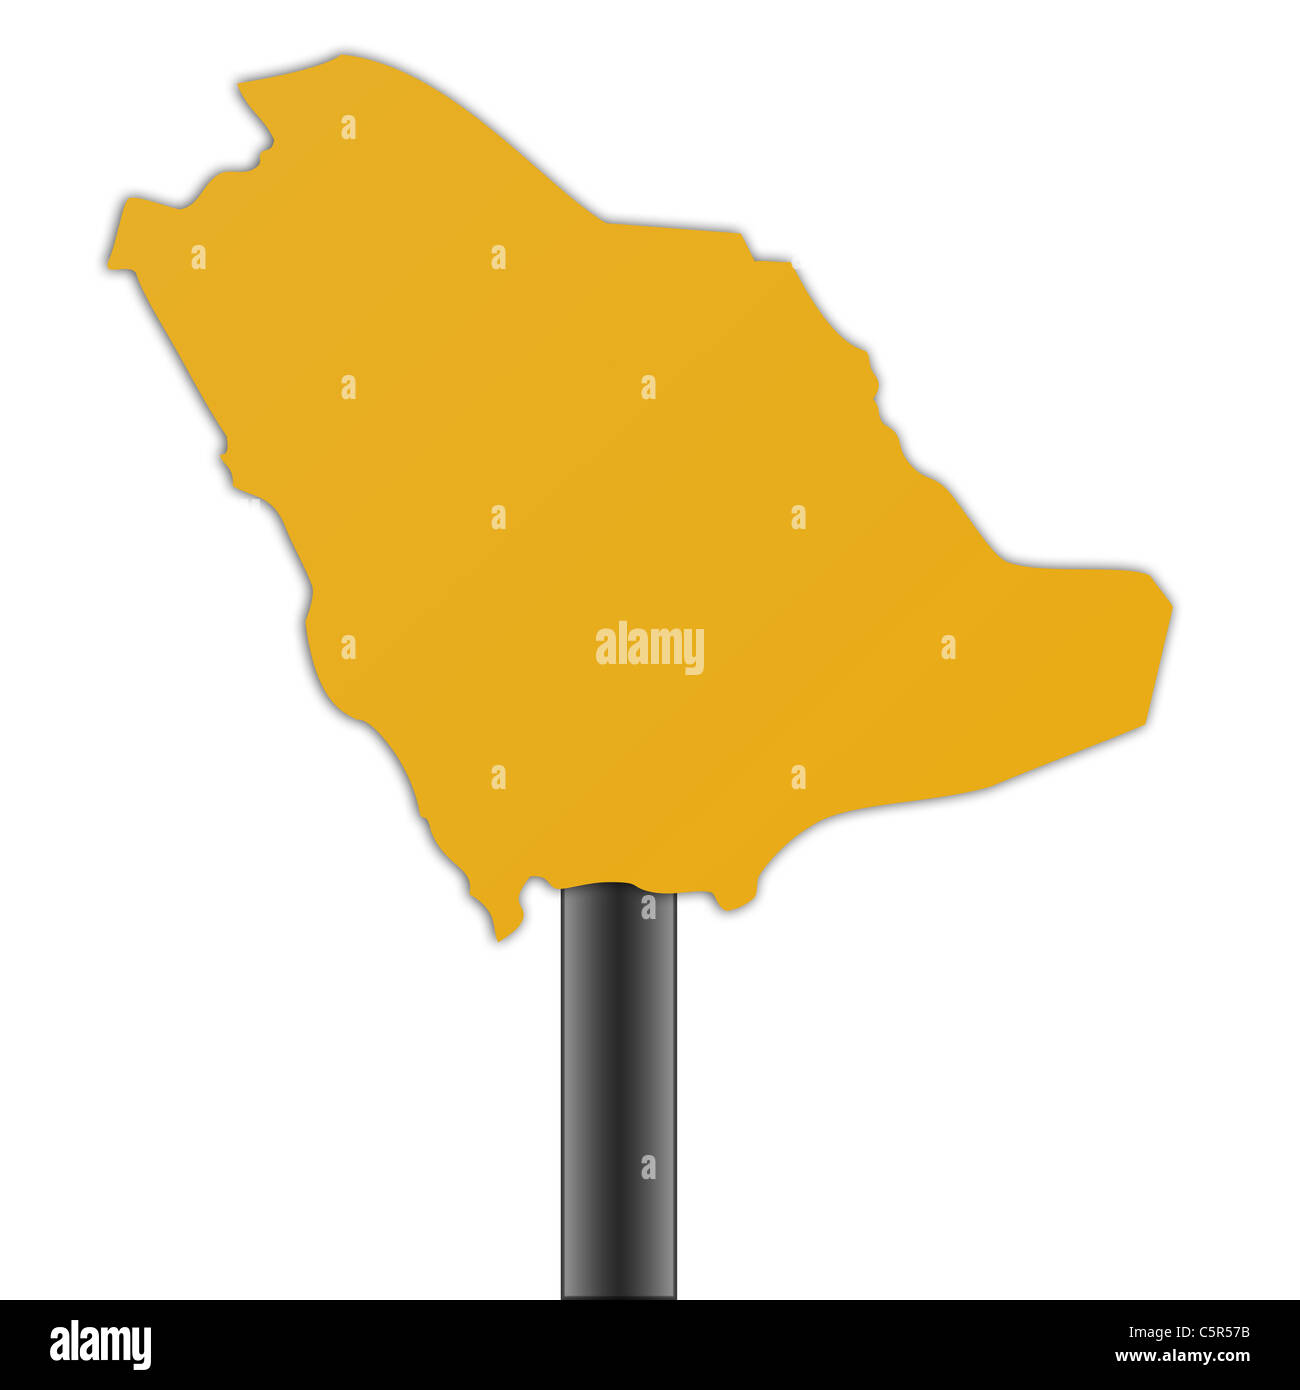 Saudi Arabia map road sign isolated on a white background. Stock Photo